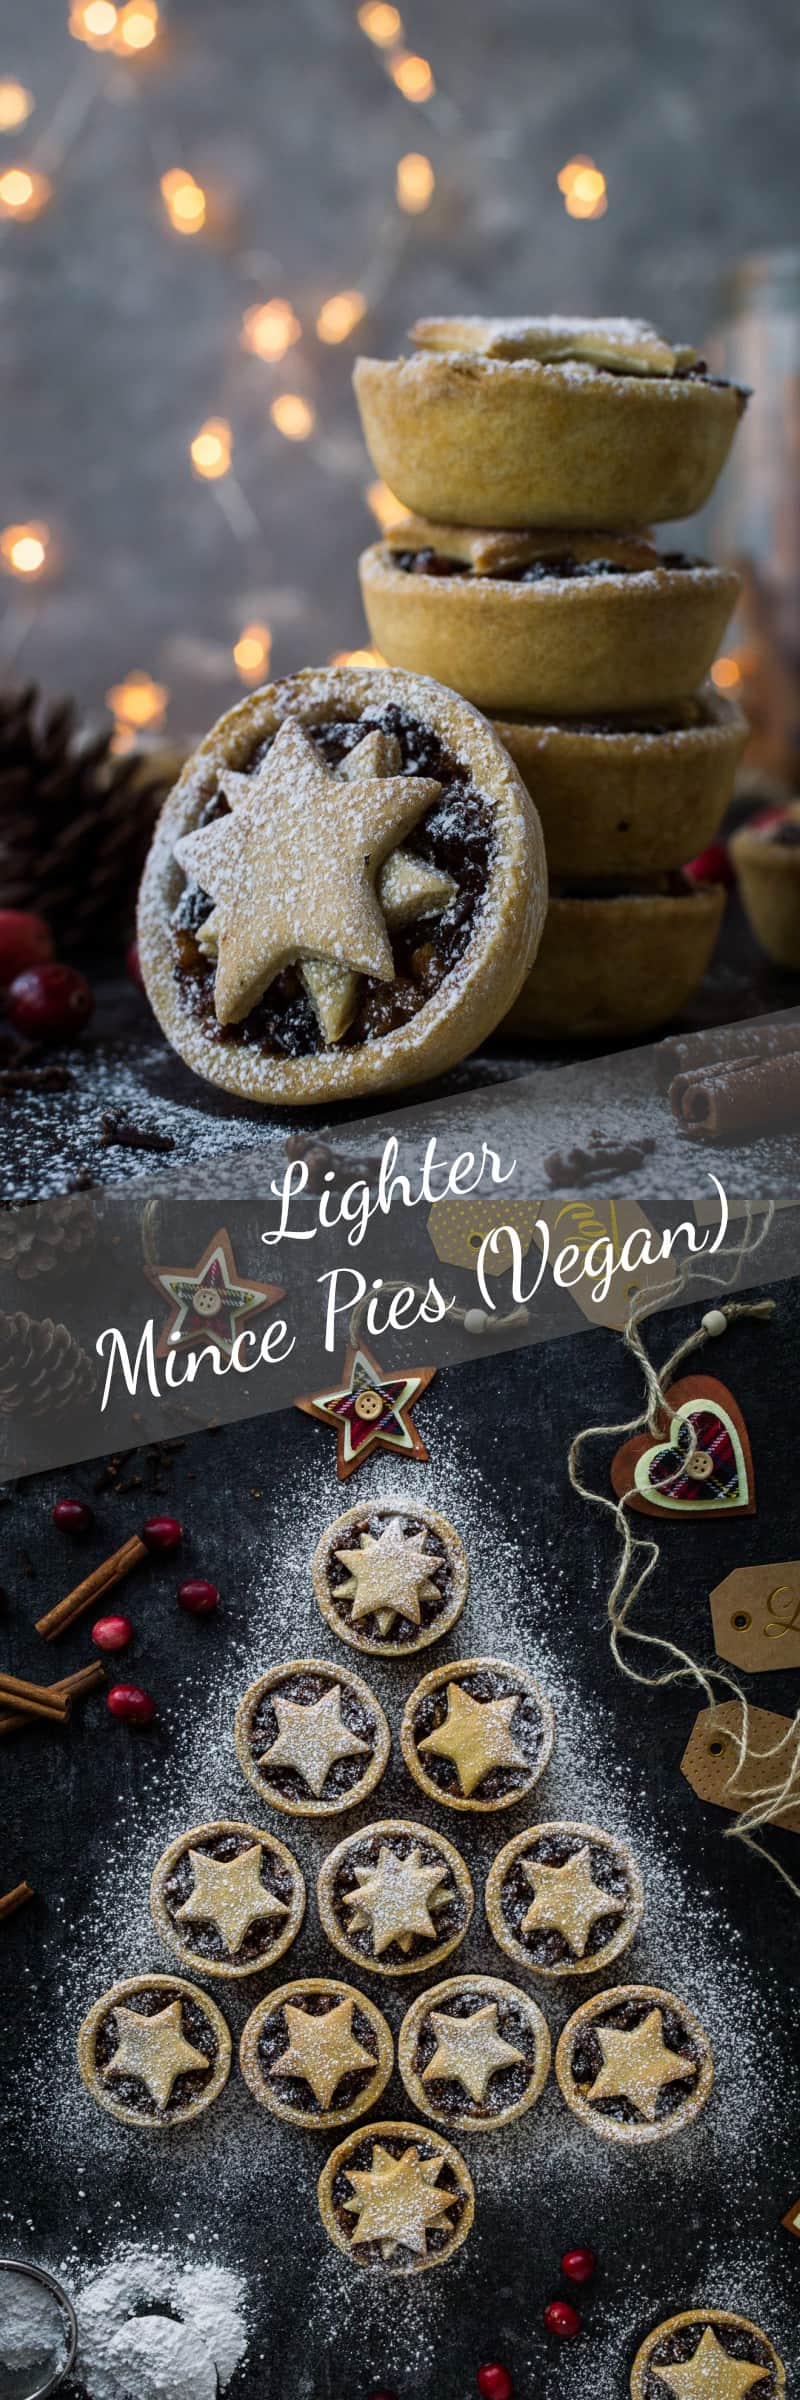 Lighter mince pies - you can enjoy a festive mince pie even if you are trying to cut down on the sweet stuff as these ones have no added sugar, are lower in calories and vegan too!